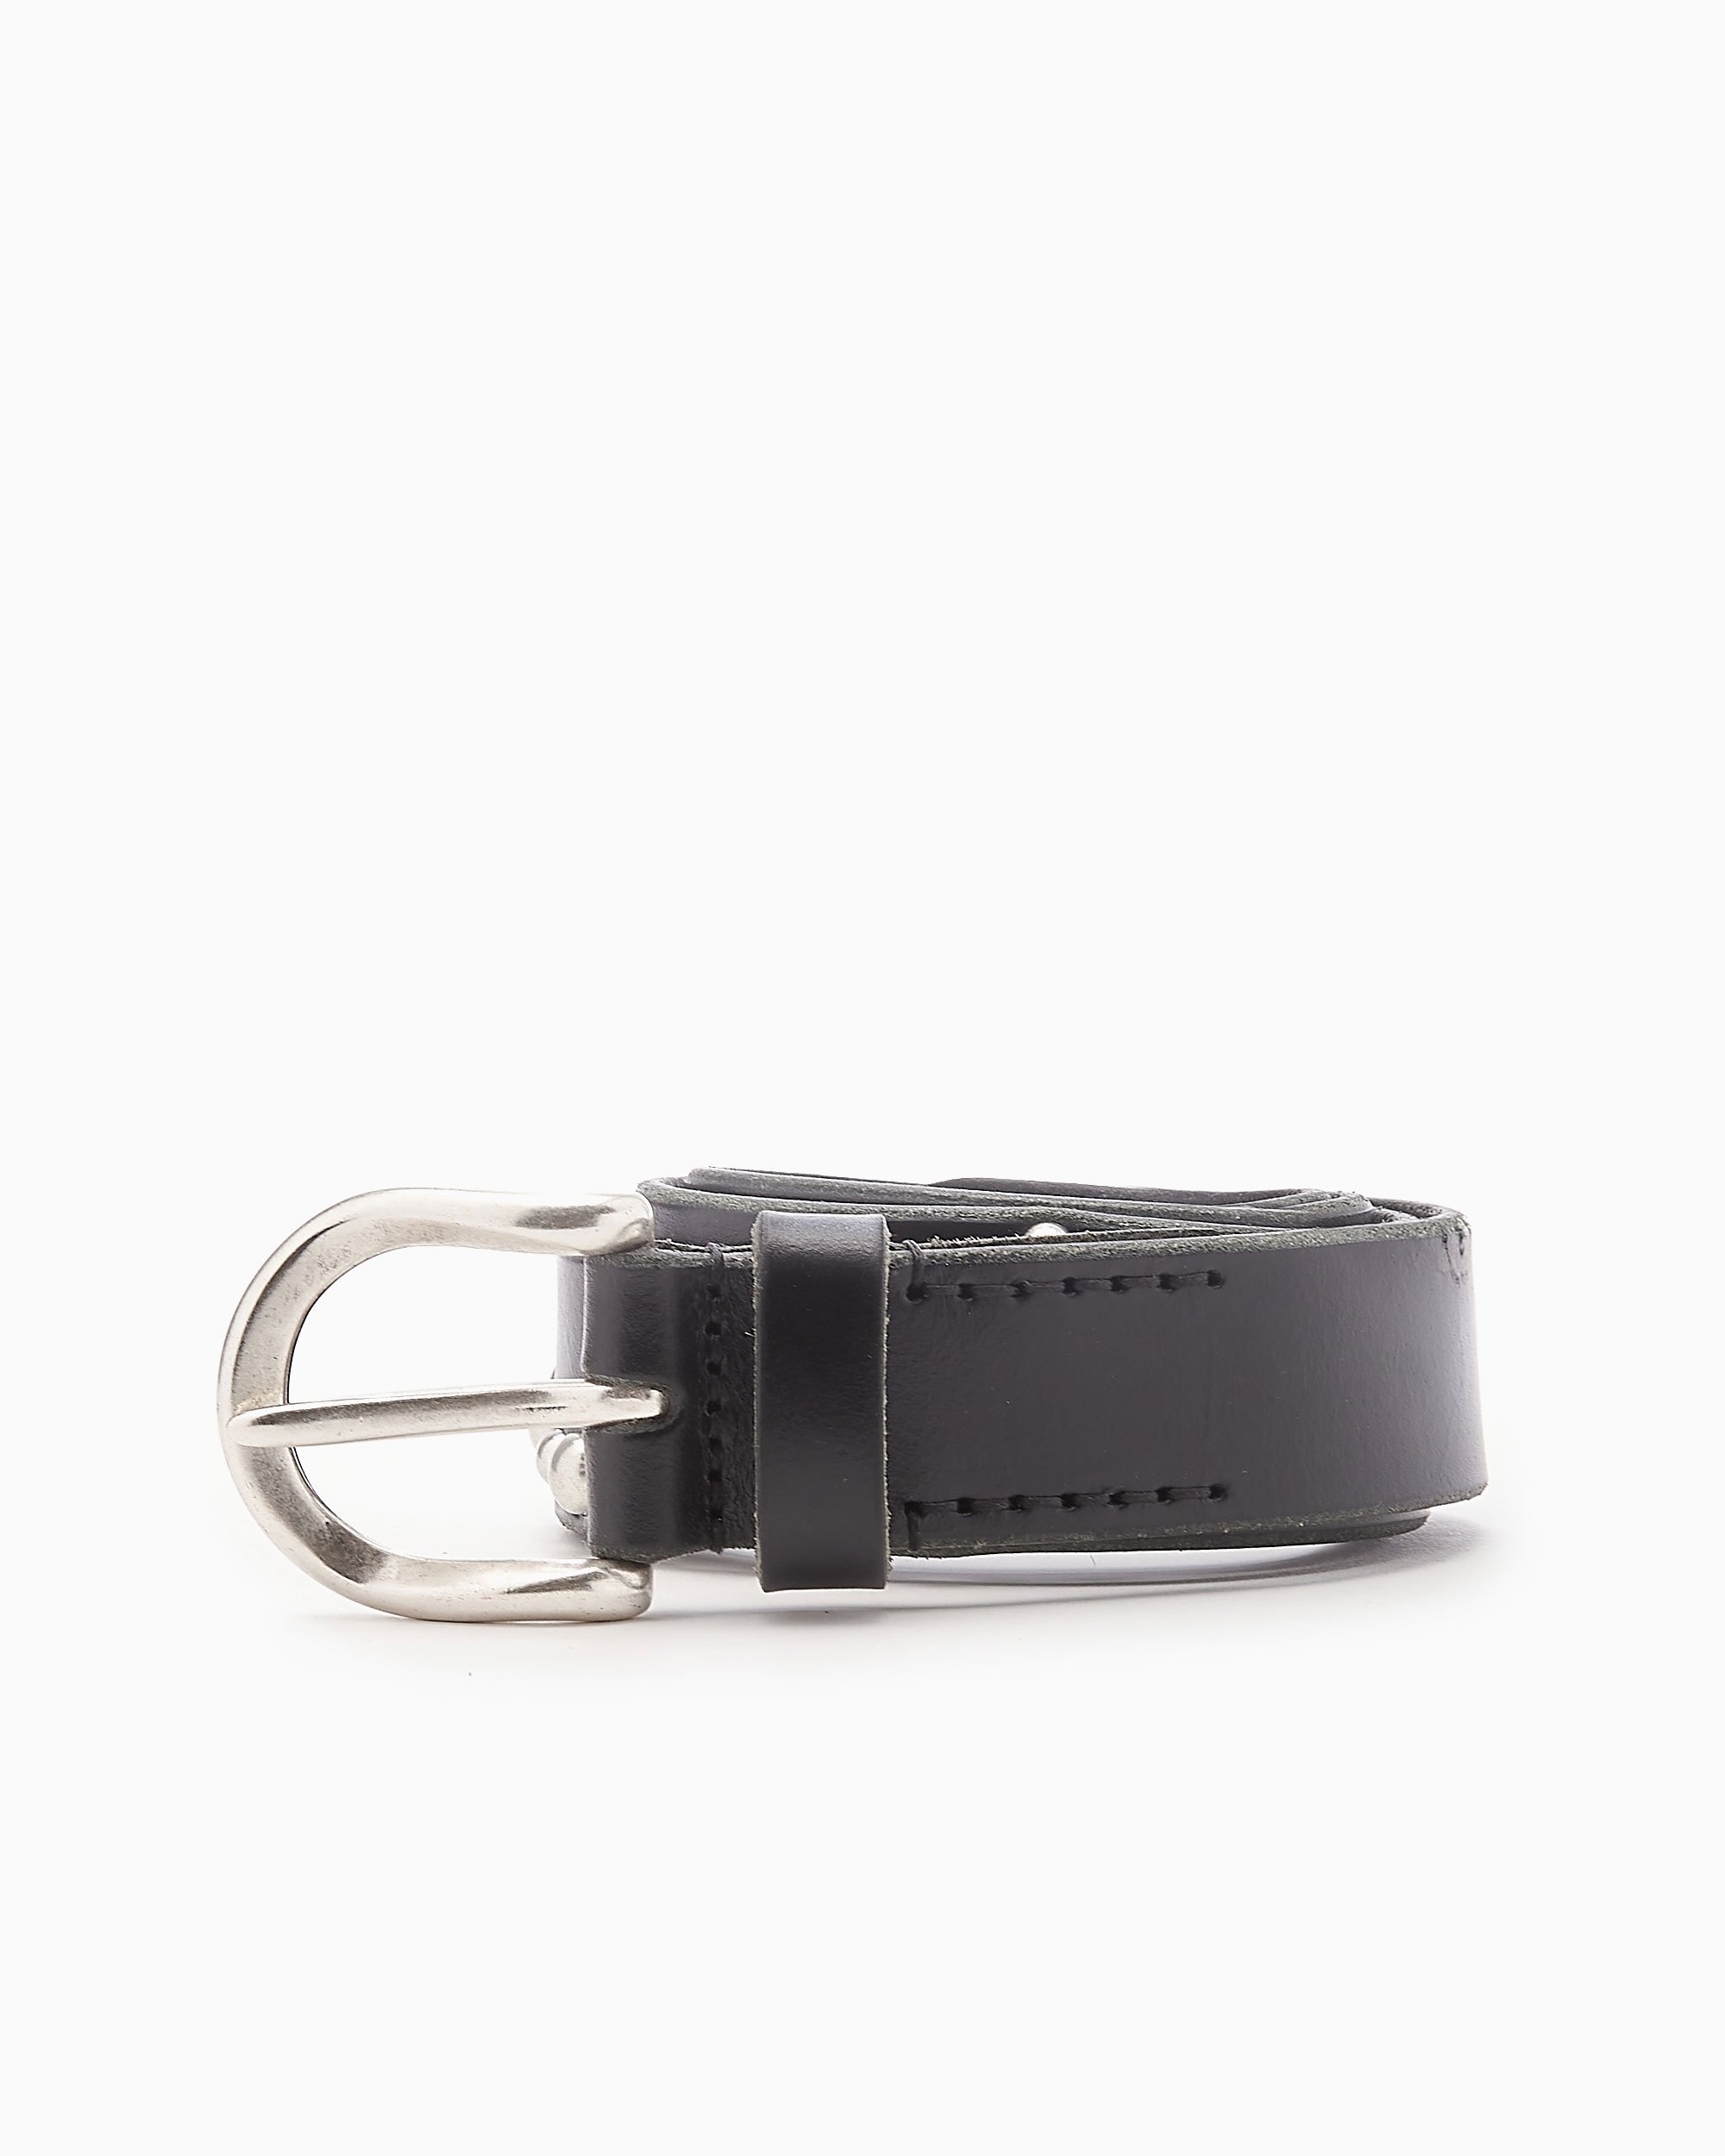 Our Legacy Star Fall Unisex Belt Black A4228SB| Buy Online at 